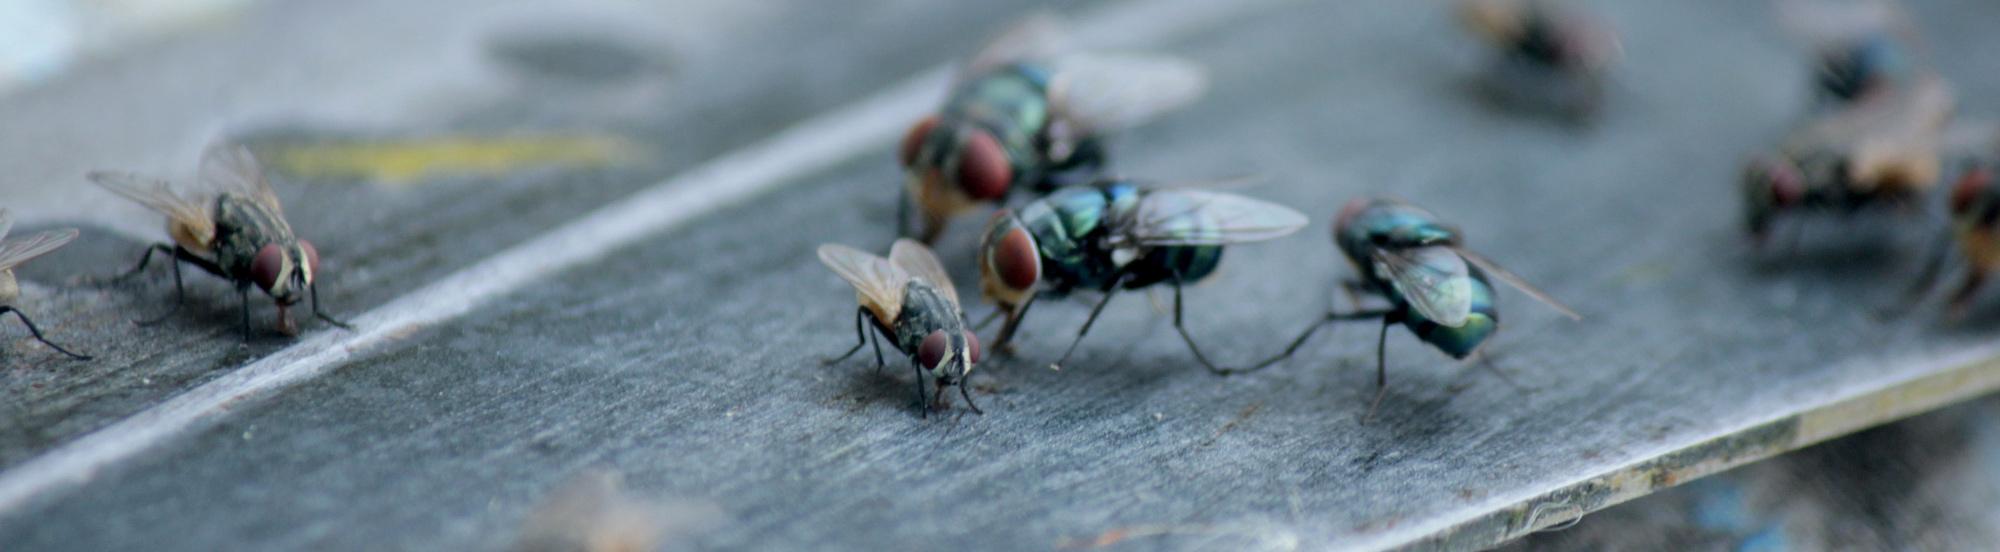 several flies on a table